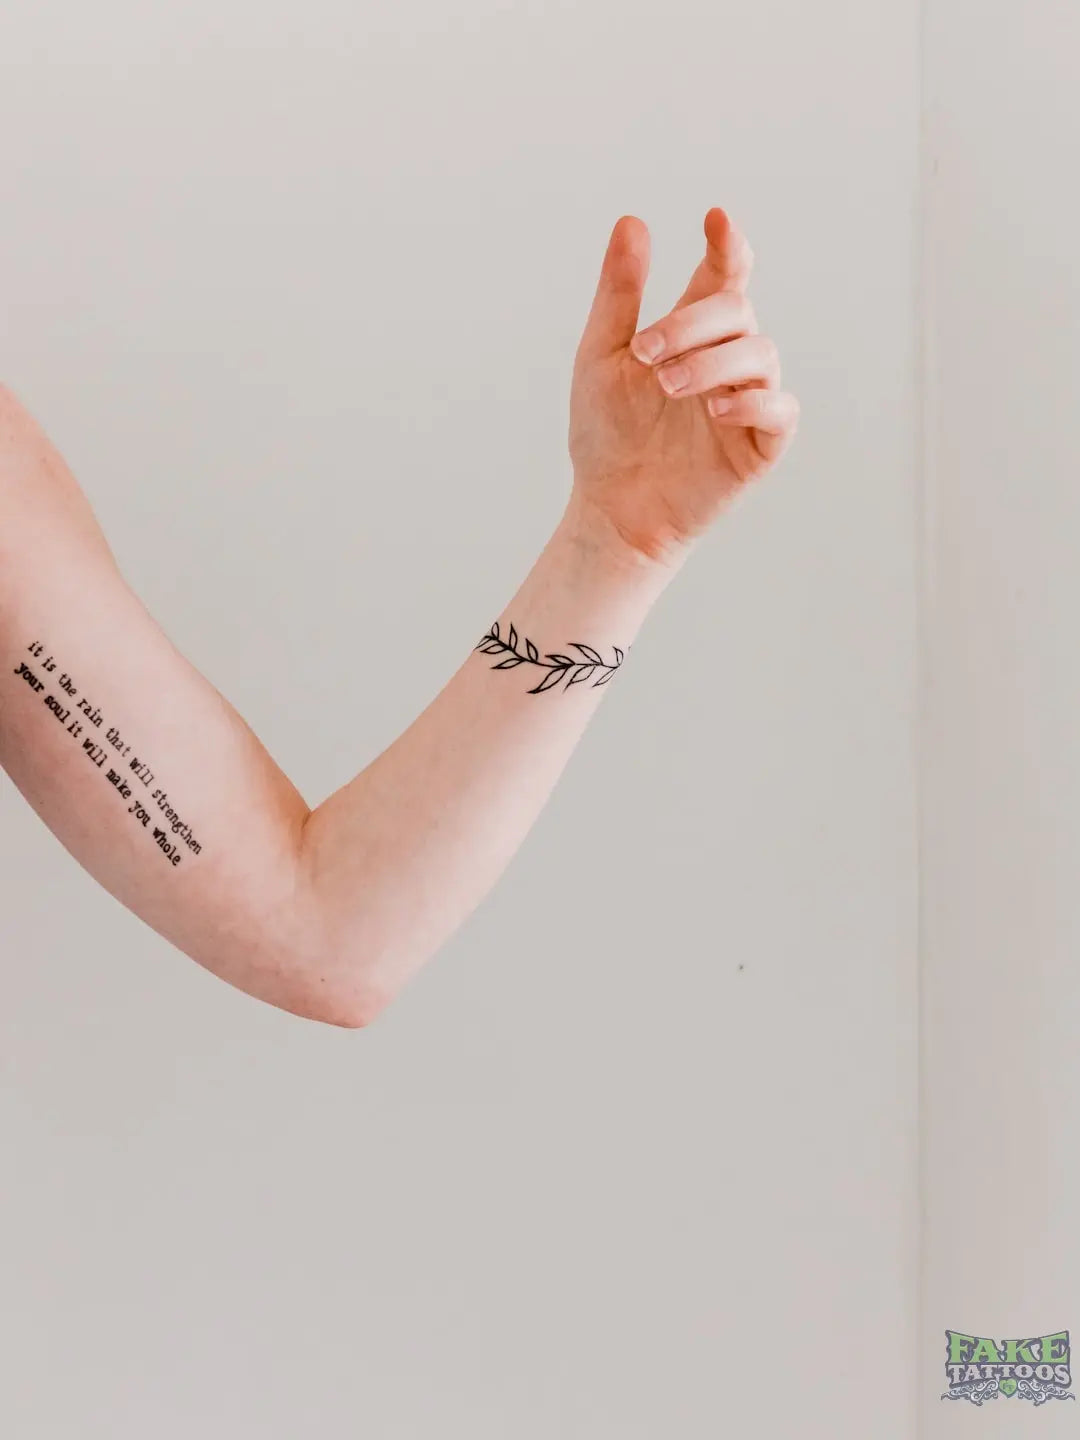 The History and Cultural Significance of Temporary Tattoos